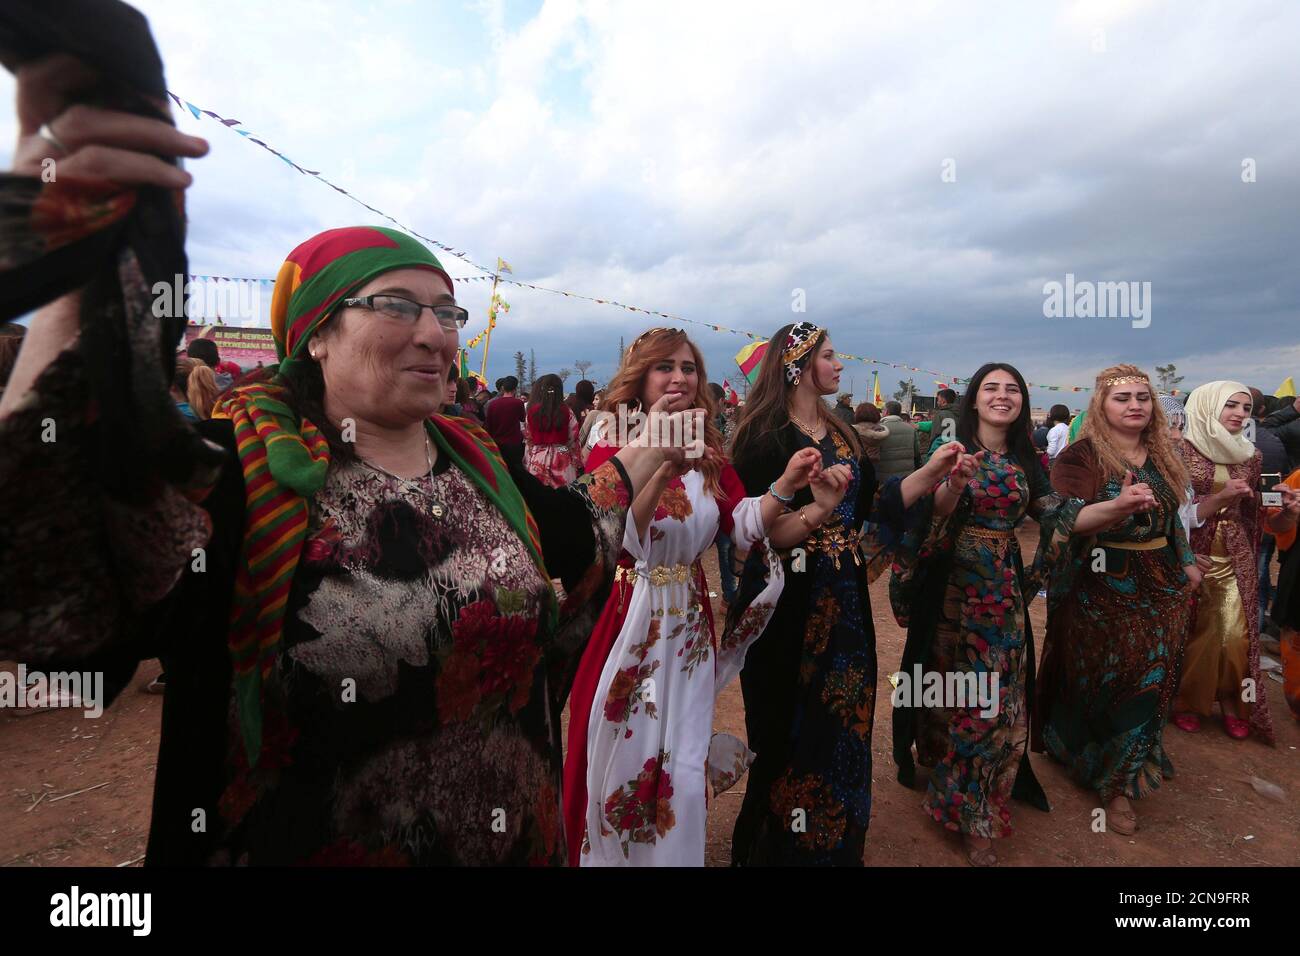 Kurdish women wearing traditional clothes dance during a celebration for  the spring festival of Nowruz, in the northeastern Syrian city of Qamishli  near the Turkish border, Syria March 21, 2017. REUTERS/Rodi Said